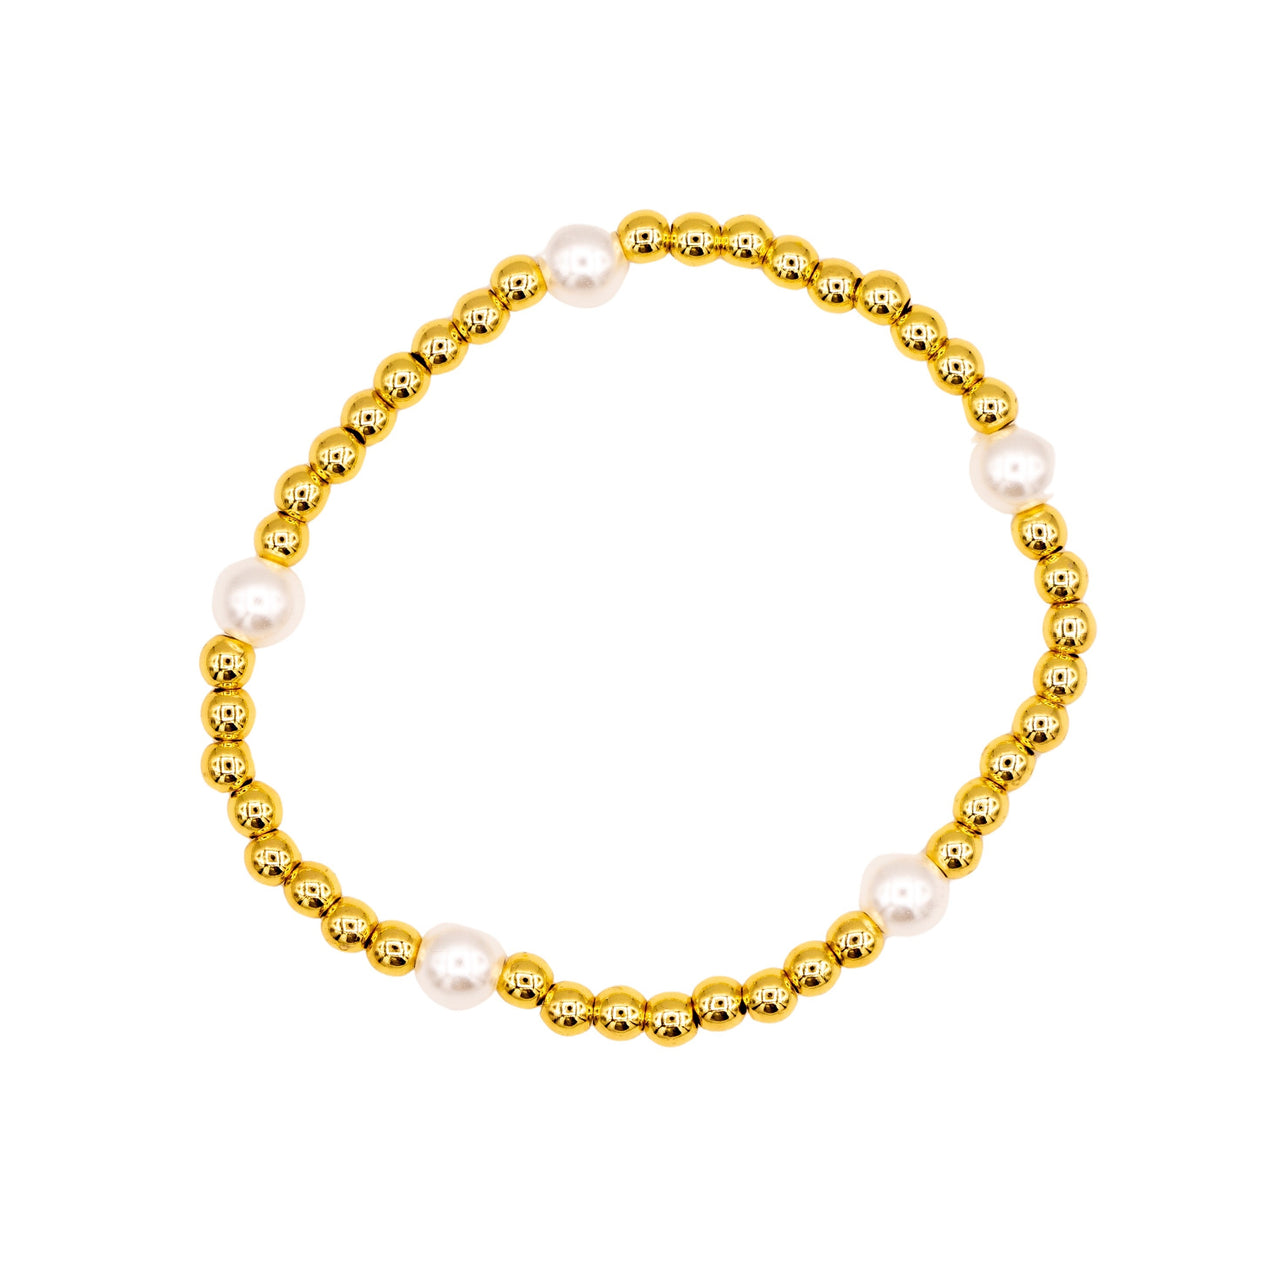 The 4mm Gold and Pearl Beaded Bracelet